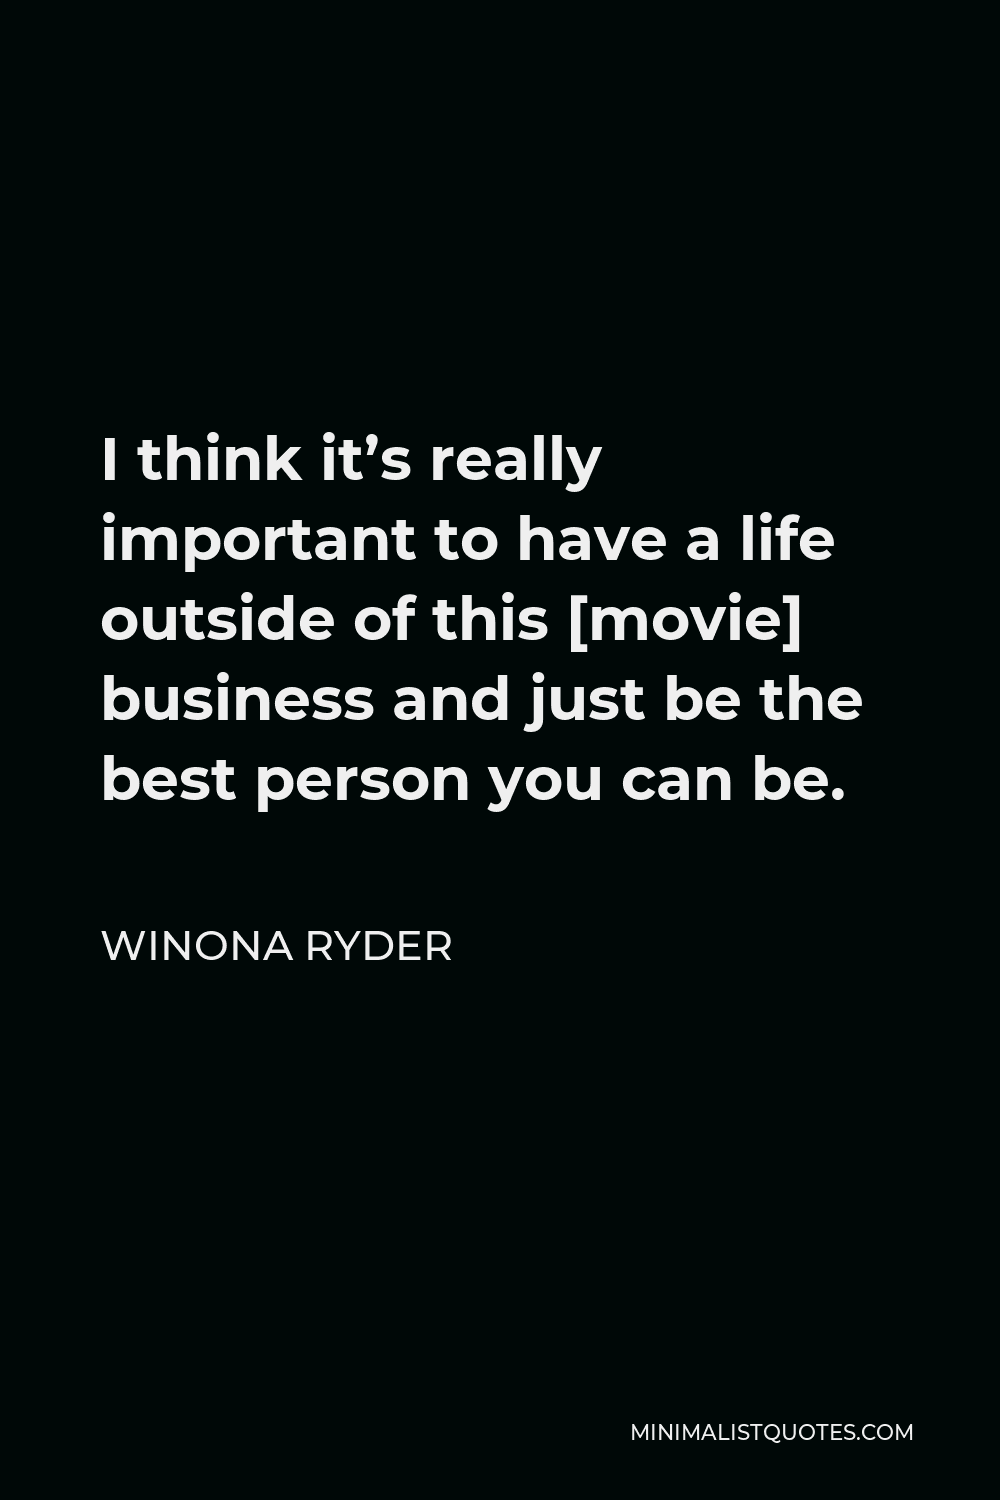 Winona Ryder Quote - I think it’s really important to have a life outside of this [movie] business and just be the best person you can be.